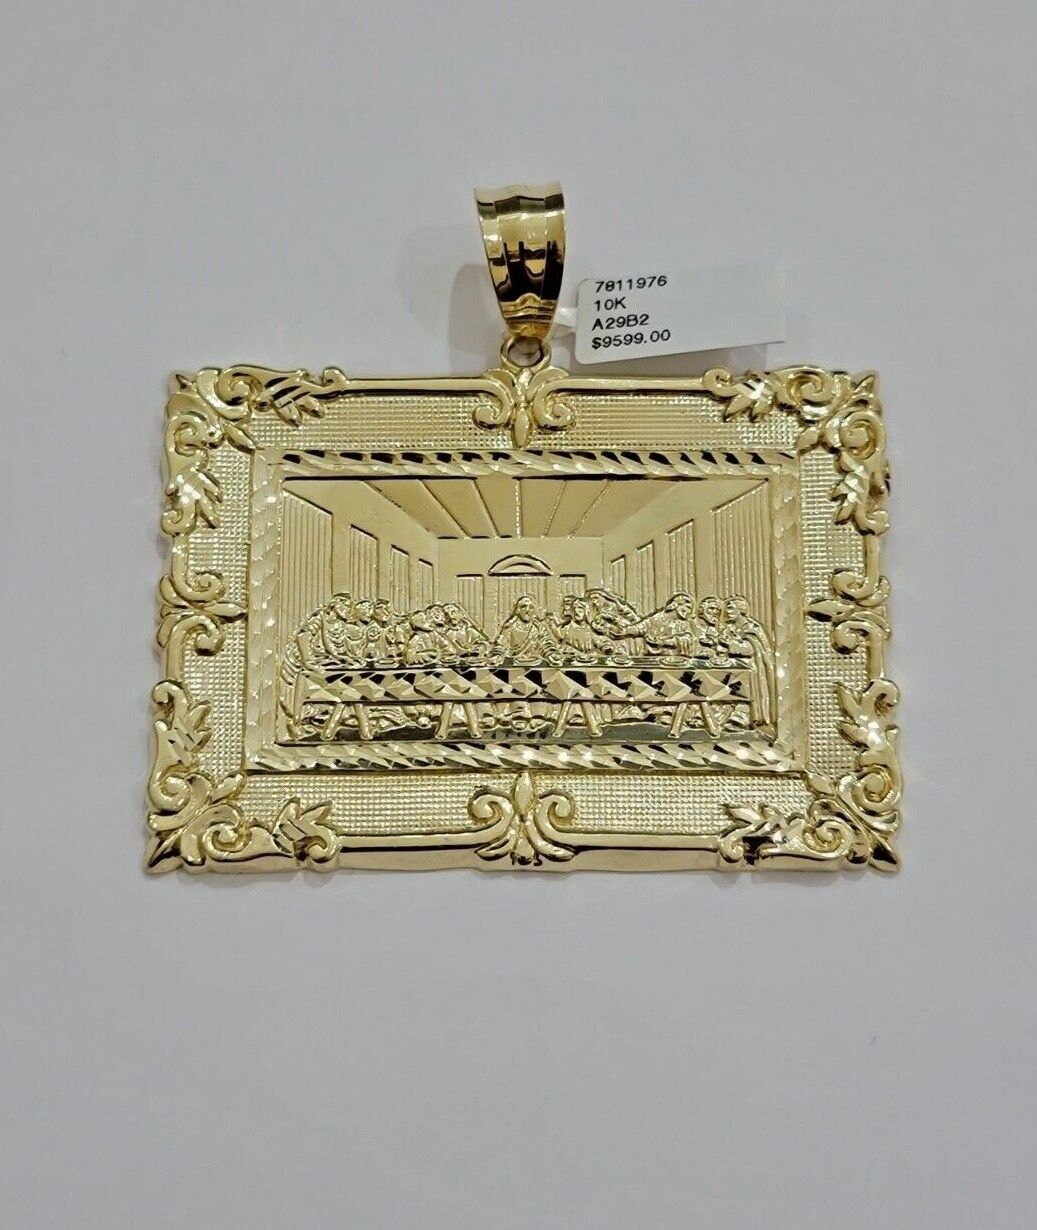 Real 10k Gold Pendant Charm Last Supper Square Jesus 10kt Yellow 1.5-3 Inch SALE